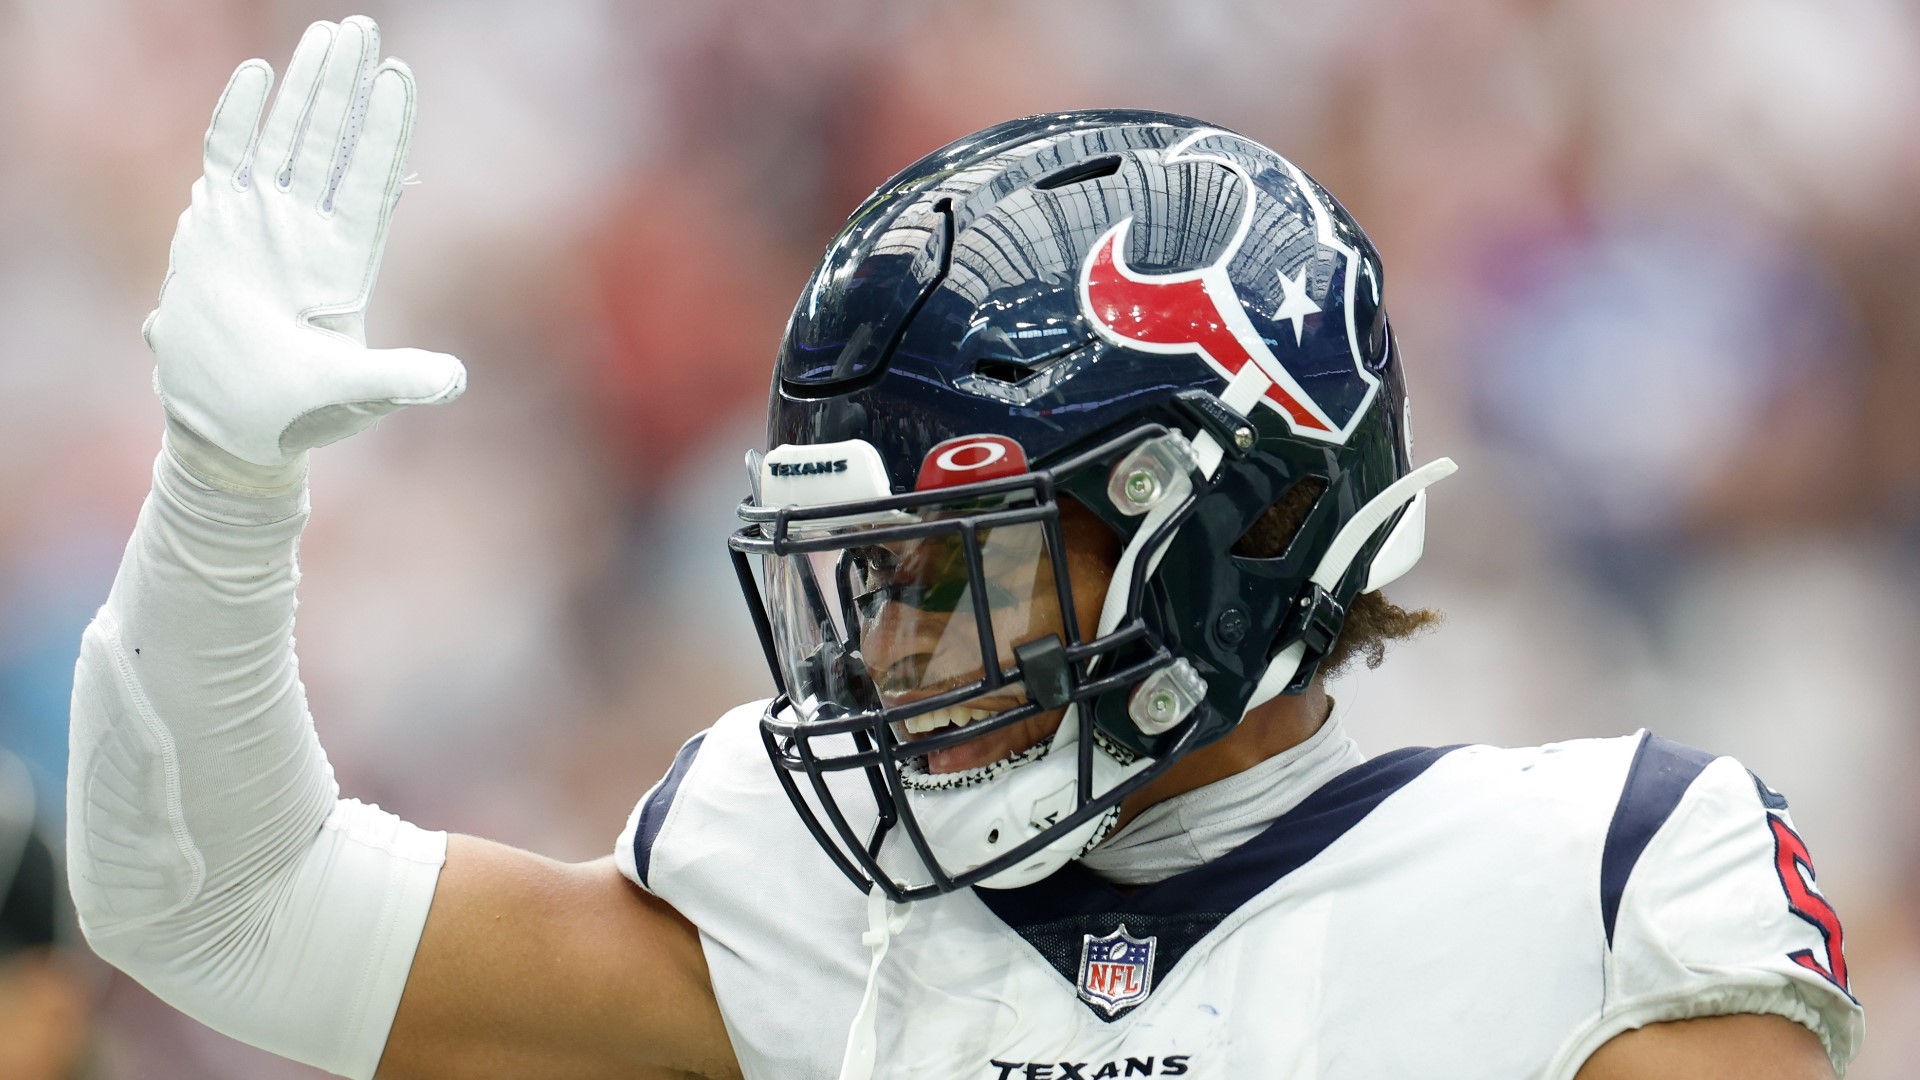 The Texans (0-0-1) are 10-point underdogs to the Denver Broncos (0-1) for Sunday's game.